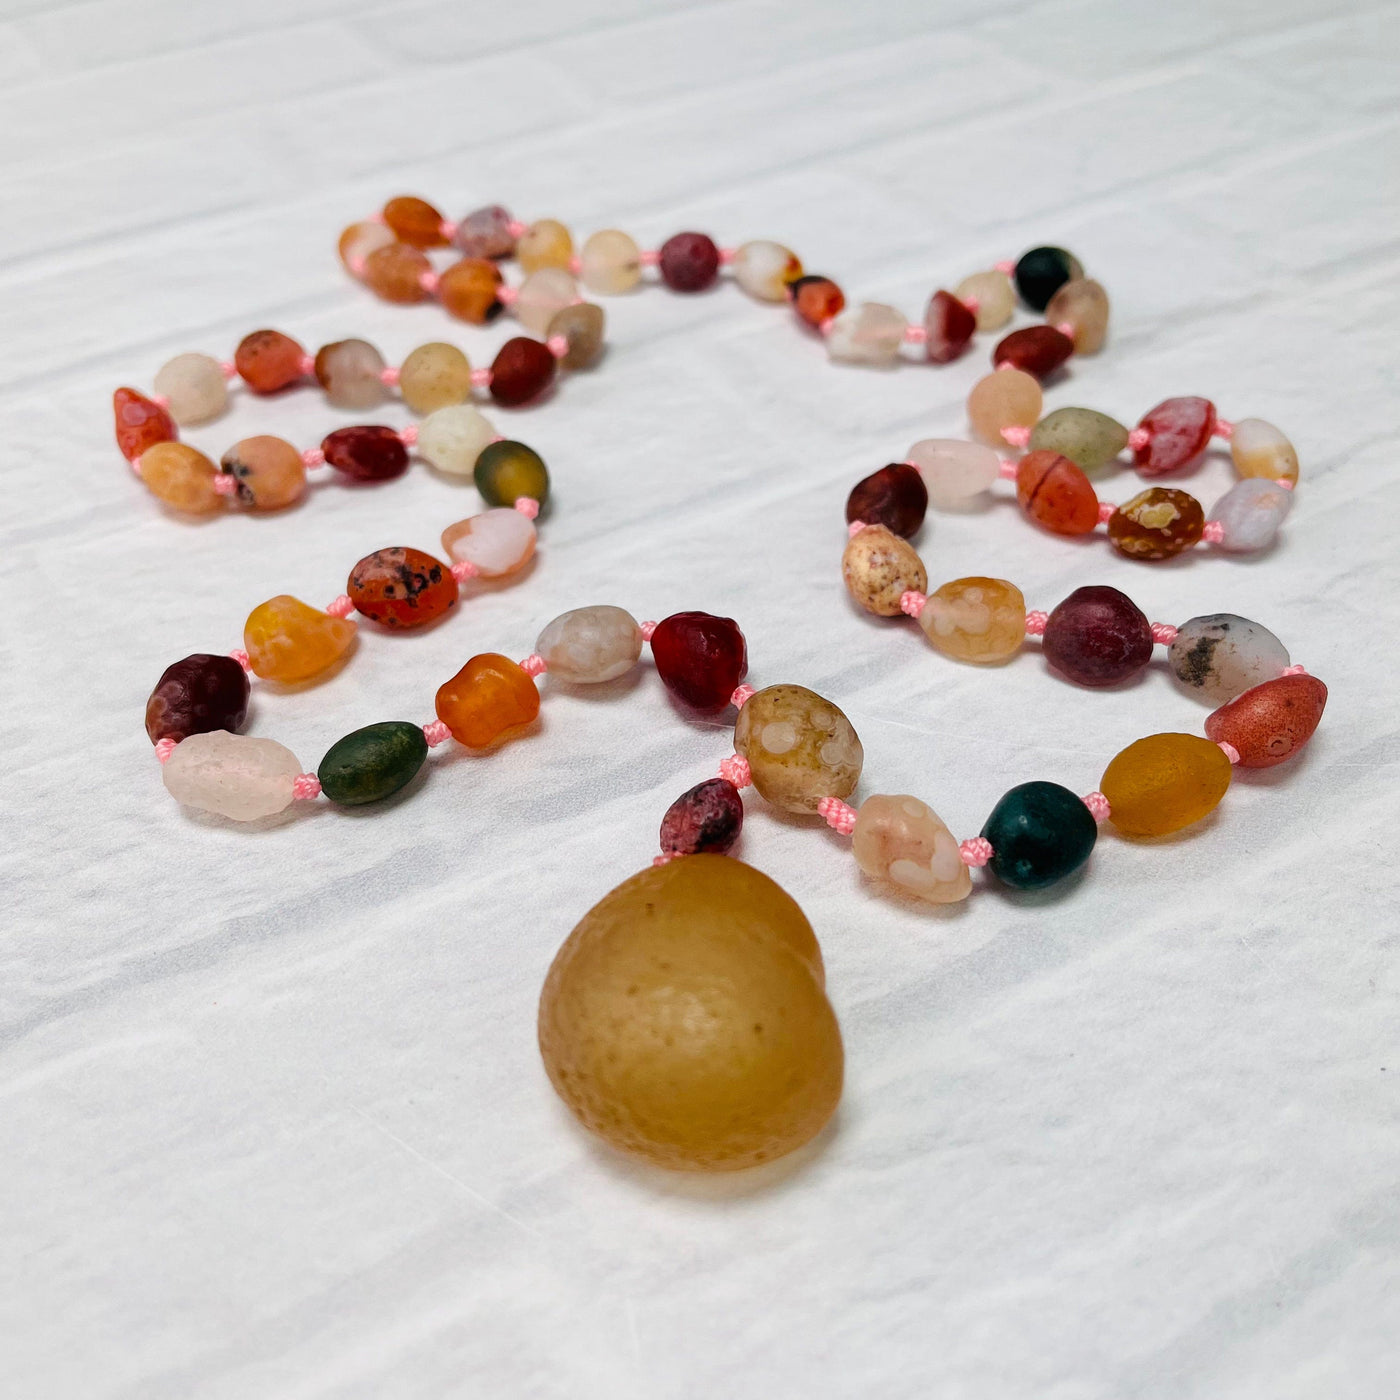 Gobi Desert Agate Bead Necklace laid out on a white surface.